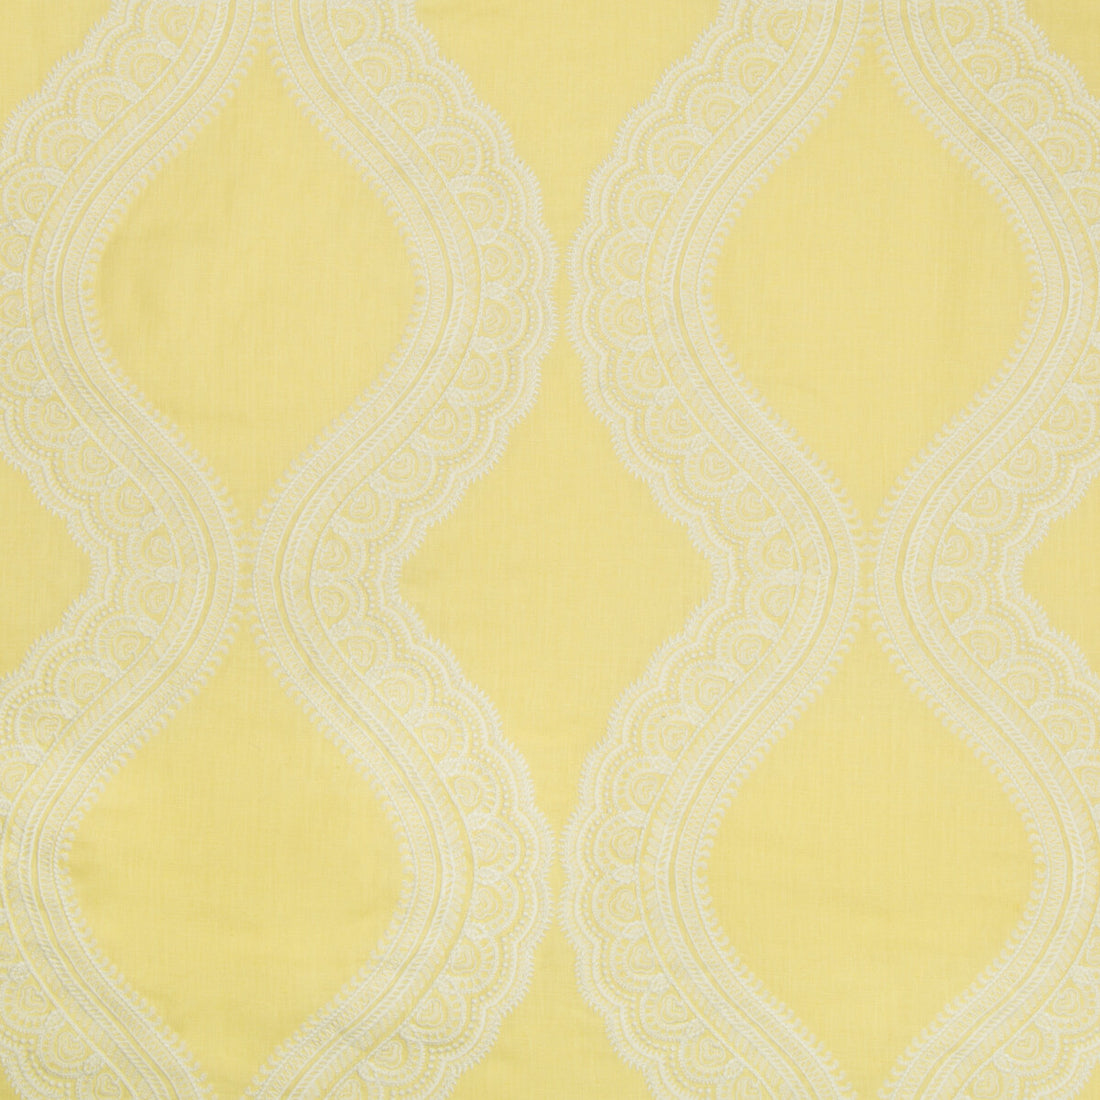 Isoline Emb fabric in canary color - pattern 8017106.14.0 - by Brunschwig &amp; Fils in the Le Parnasse collection